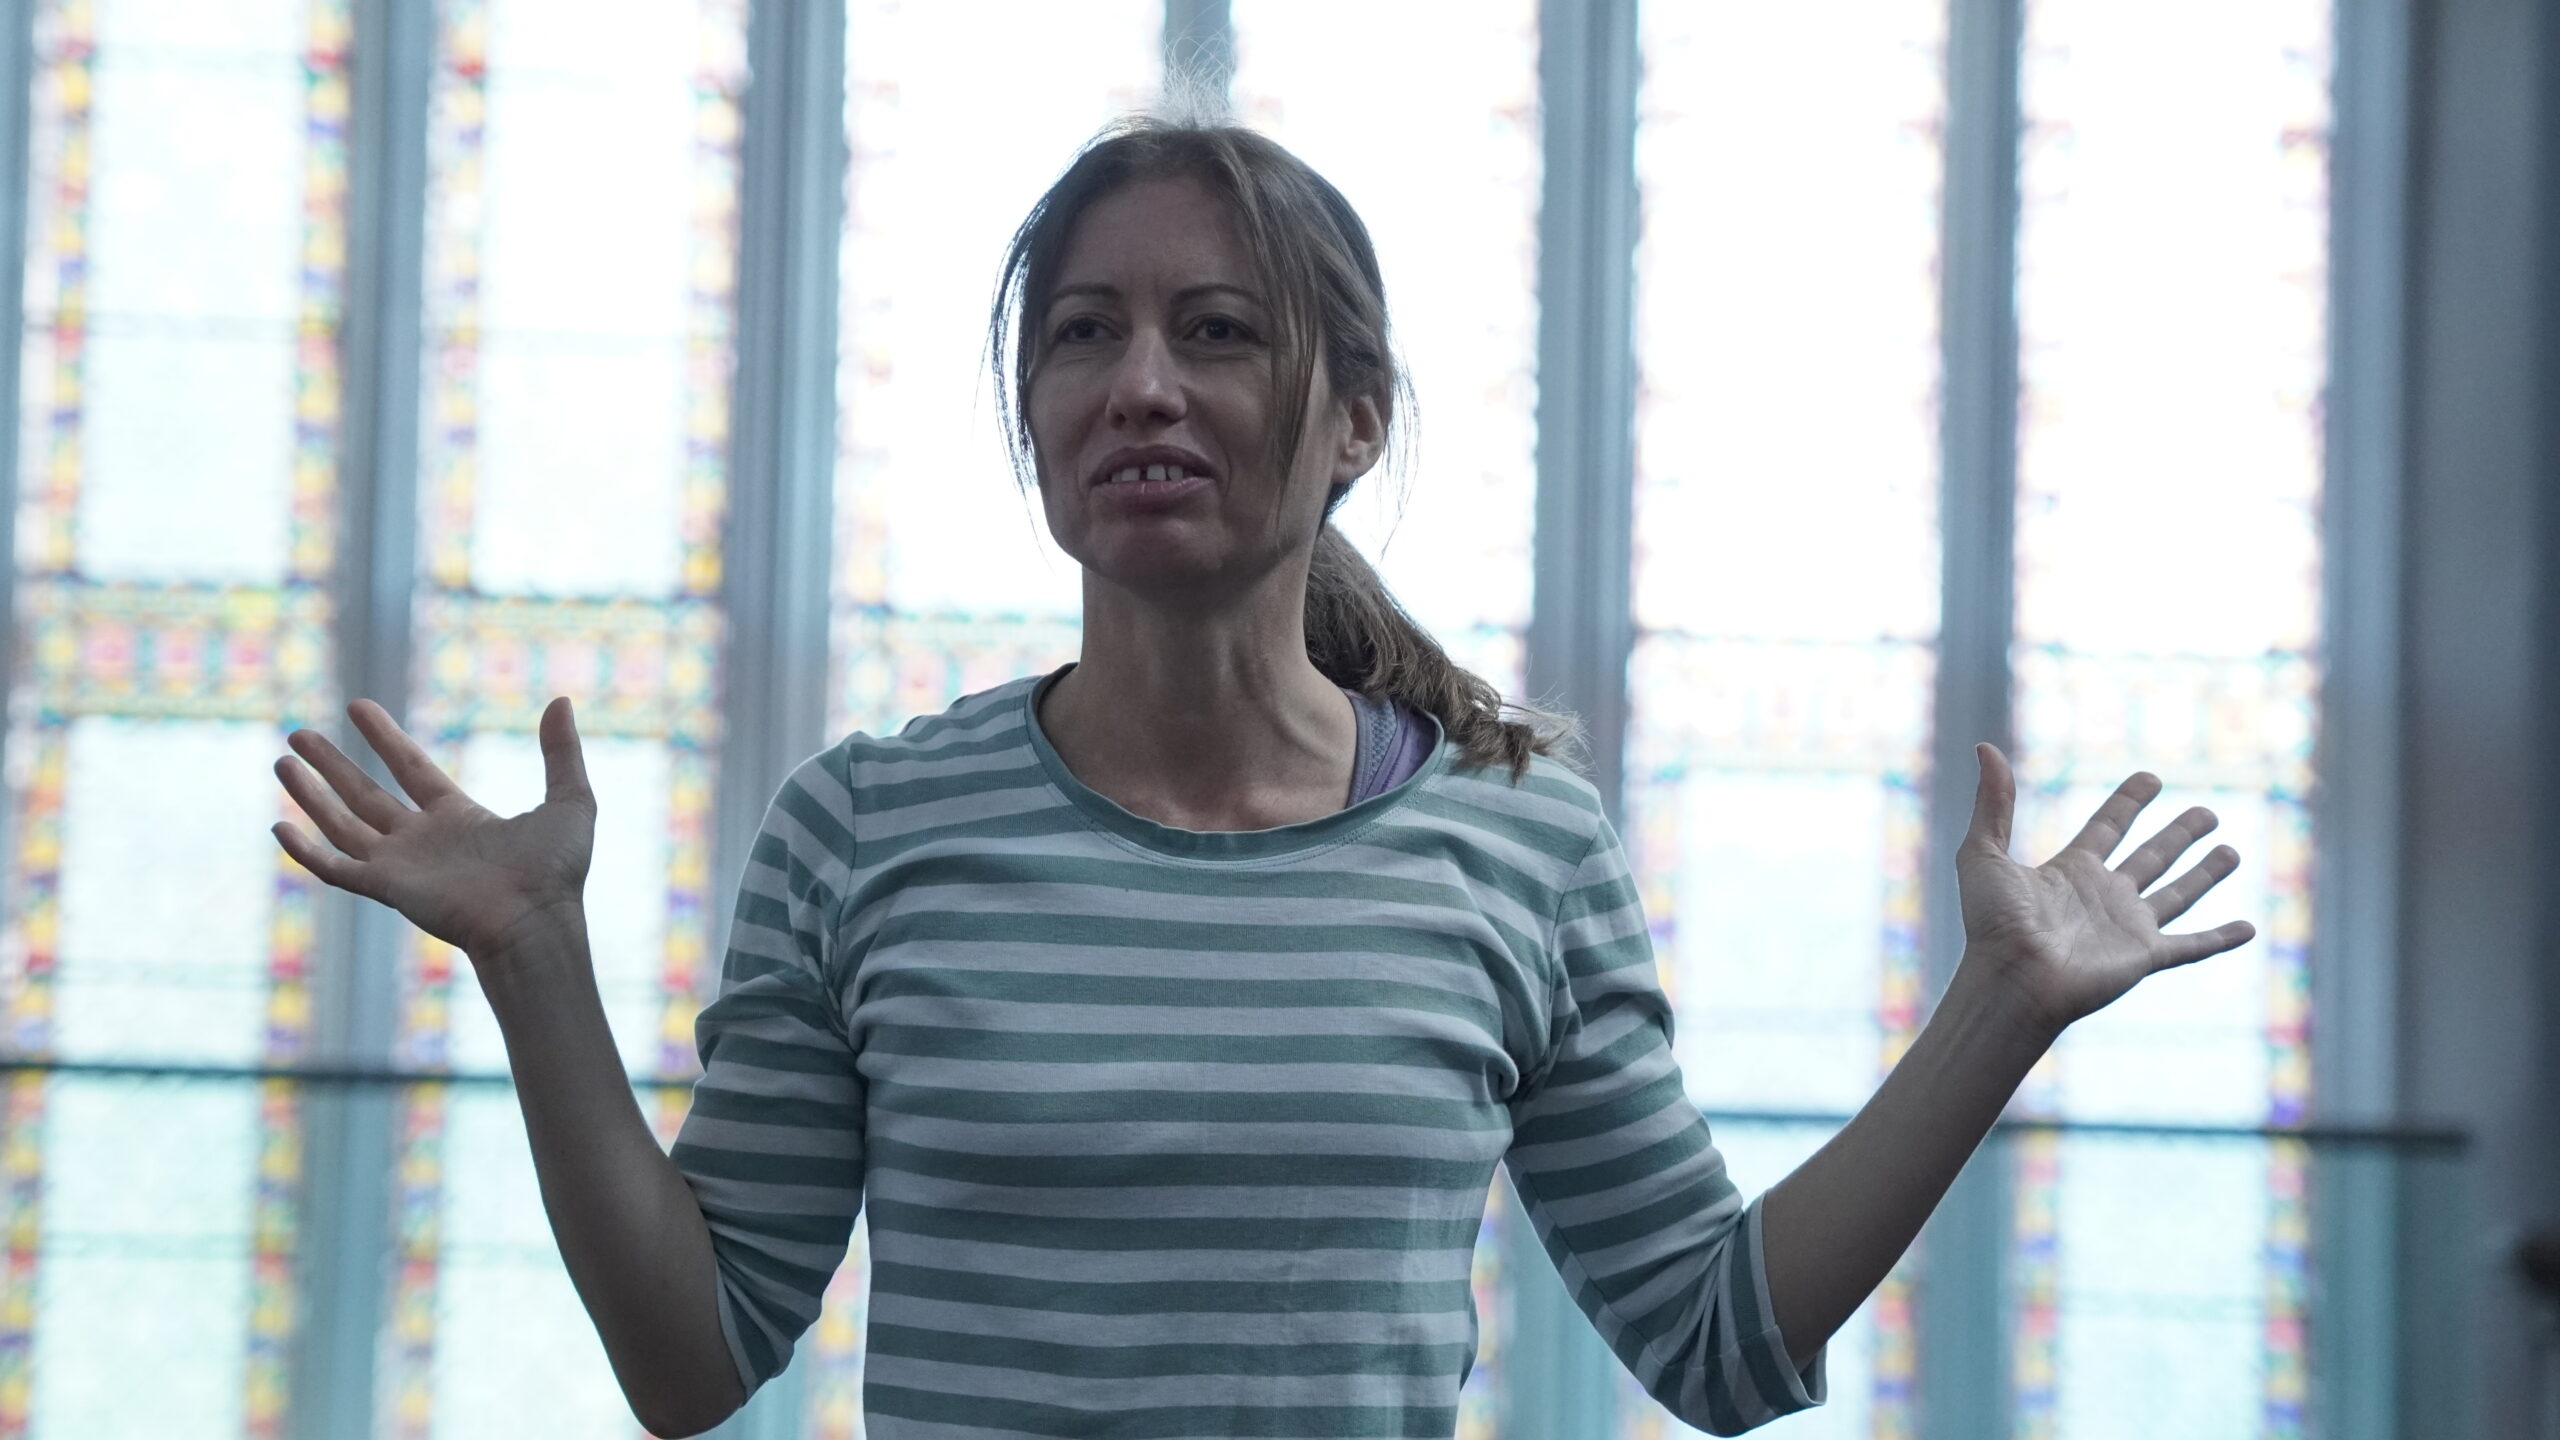 Holly, a fair skinned woman, is pictured front on and from the waist up, arms wide and palm of hands up in an expressive gesture of openness. She is wearing a green and white striped sweatshirt and has her hair in a ponytail. She is smiling. Behind her in soft focus is a large floor to ceiling window with oblong panes of stained glass.